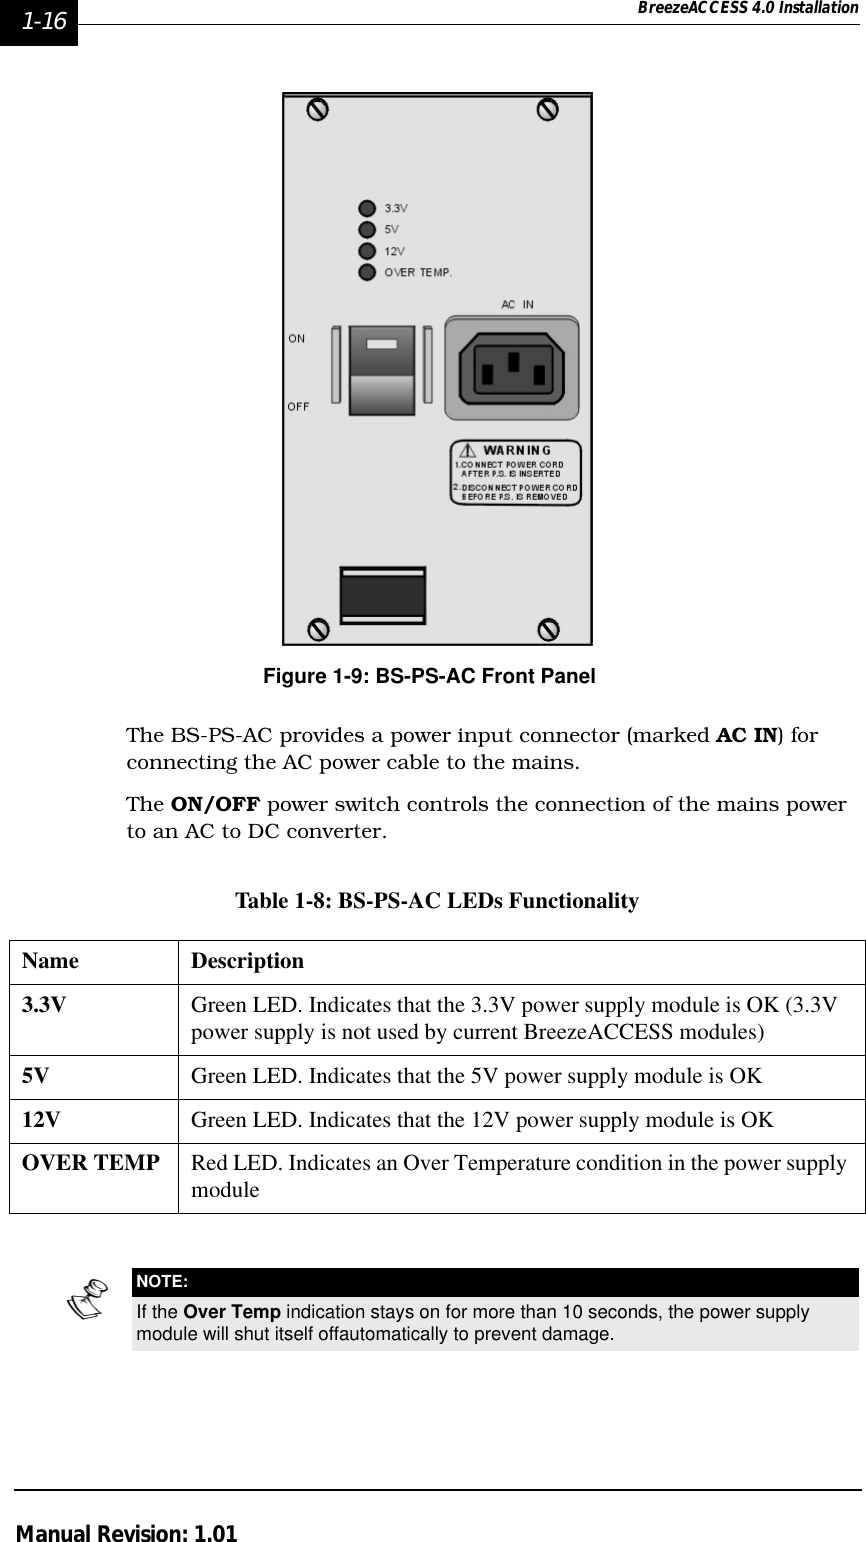 1-16 BreezeACCESS 4.0 InstallationManual Revision: 1.01Figure 1-9: BS-PS-AC Front PanelThe BS-PS-AC provides a power input connector (marked AC IN) for connecting the AC power cable to the mains. The ON/OFF power switch controls the connection of the mains power to an AC to DC converter.Table 1-8: BS-PS-AC LEDs FunctionalityName Description3.3V Green LED. Indicates that the 3.3V power supply module is OK (3.3V power supply is not used by current BreezeACCESS modules)5V Green LED. Indicates that the 5V power supply module is OK12V Green LED. Indicates that the 12V power supply module is OK OVER TEMP Red LED. Indicates an Over Temperature condition in the power supply moduleNOTE:If the Over Temp indication stays on for more than 10 seconds, the power supply module will shut itself offautomatically to prevent damage. 